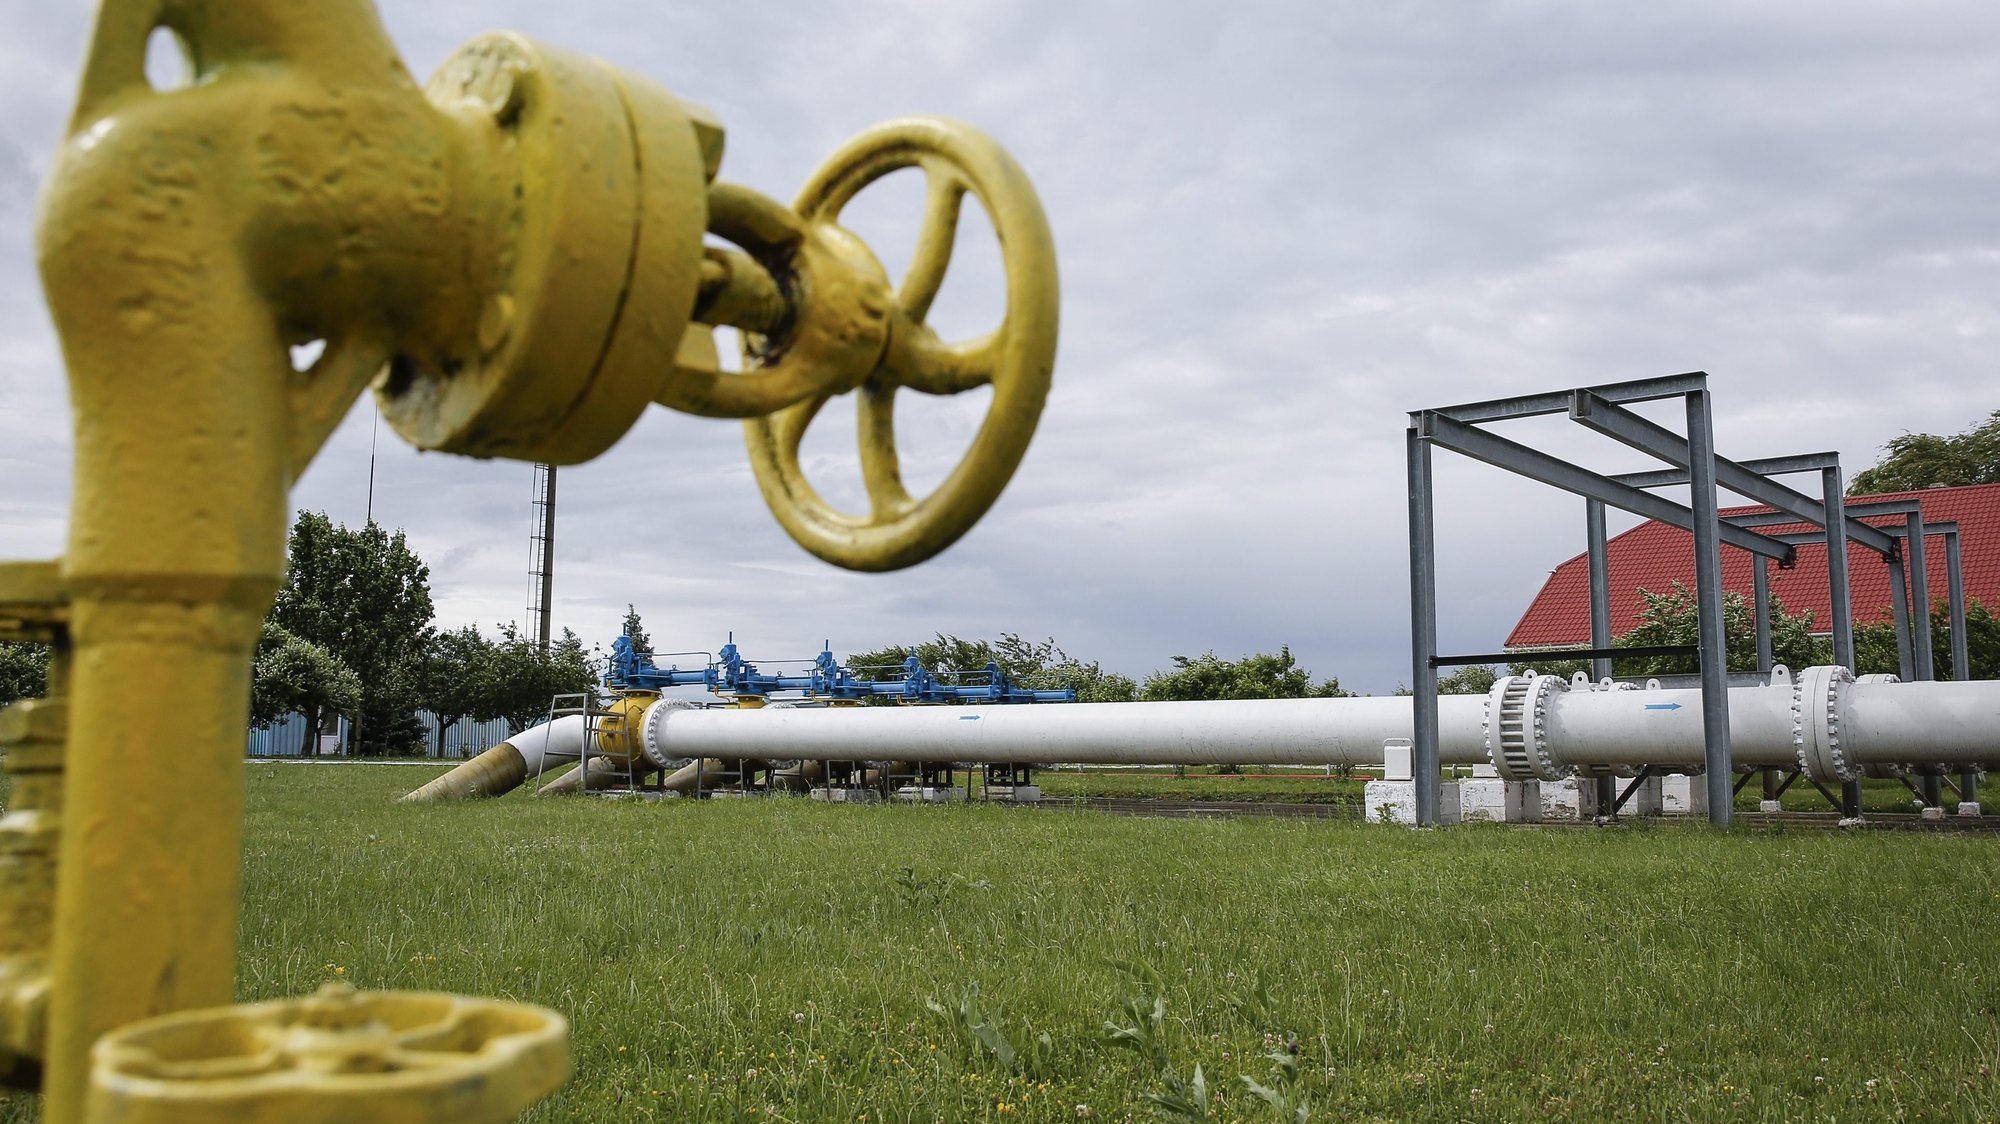 epa04770409 A gas pipe line at the gas measuring station in the western Ukrainian city of Uzhgorod, not far on border with Slovakia, 27 May 2015. Cash-strapped Ukraine is heavily dependent on energy from Russia and is also a key transit country for supplies to Western Europe. The European Union has been mediating in gas disputes between the two sides, whose relations are strained by the conflict in eastern Ukraine.  EPA/ROMAN PILIPEY